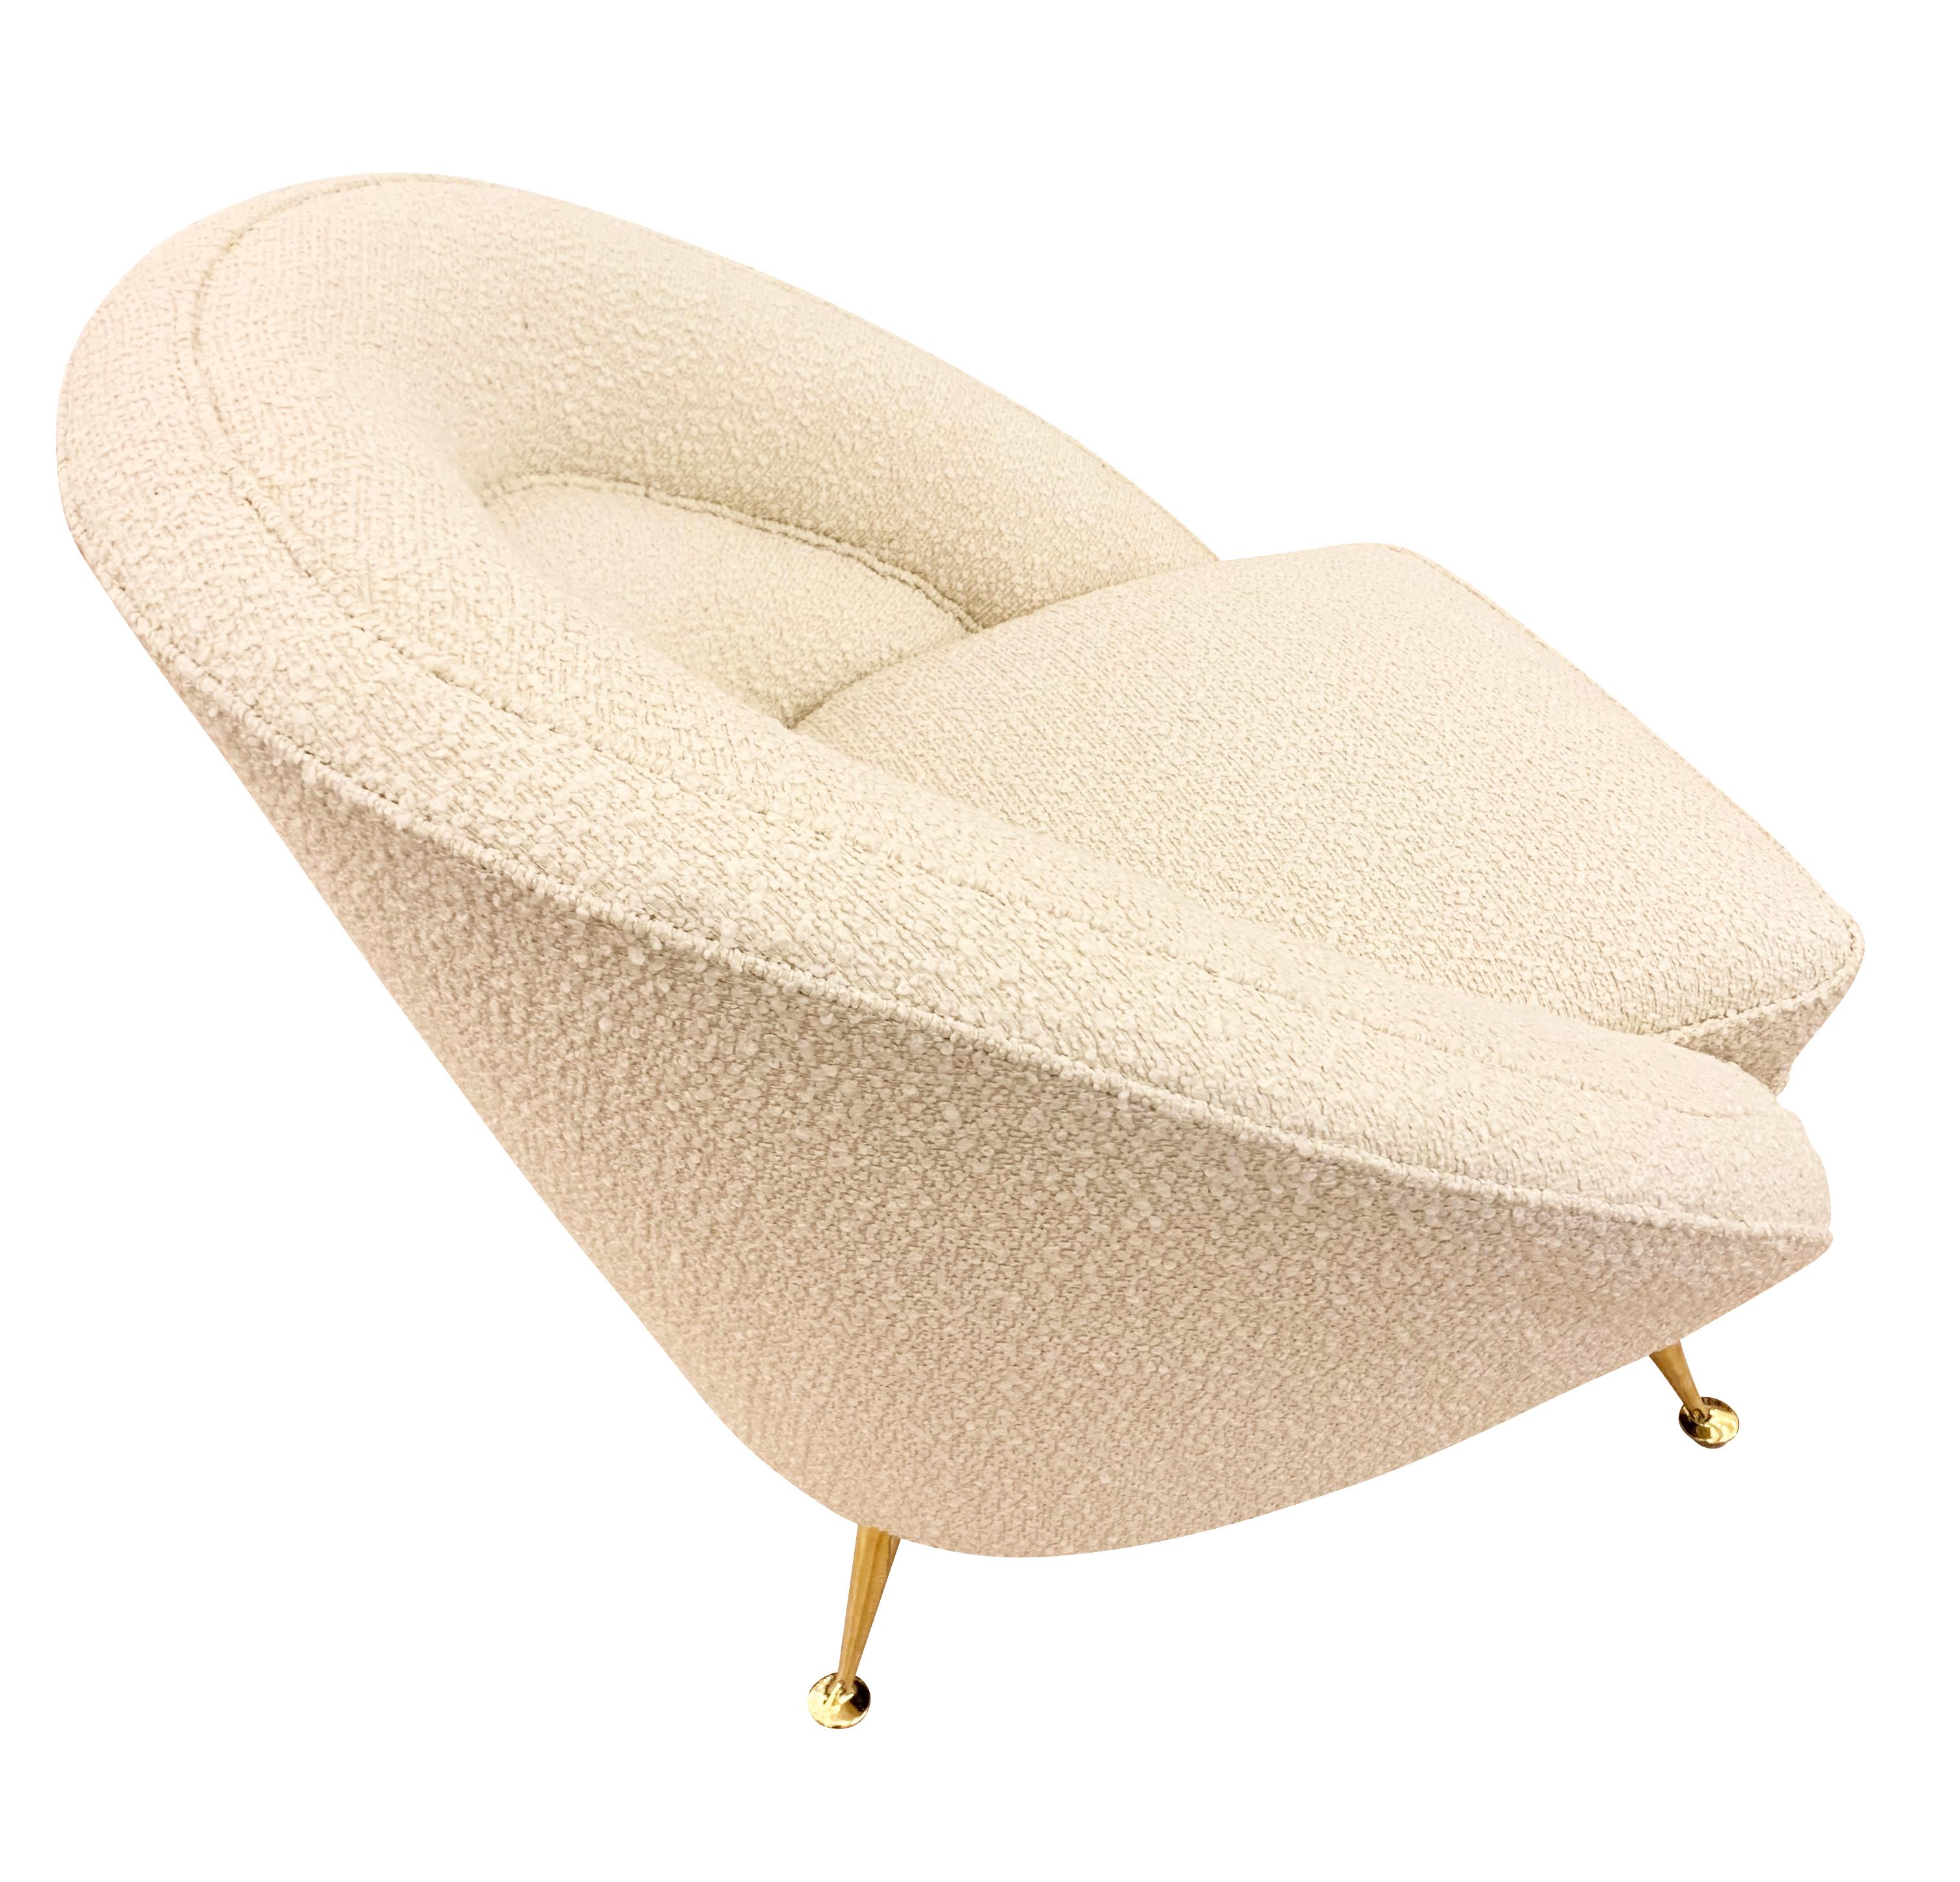 Curvaceous Mid-Century lounge chairs by ISA Bergamo with brass feet. Recovered in an off-white boucle fabric. Price for the pair-sold individually on request.

Condition: Minor wear consistent with age and use. Recently recovered.

Width: 32”

Seat